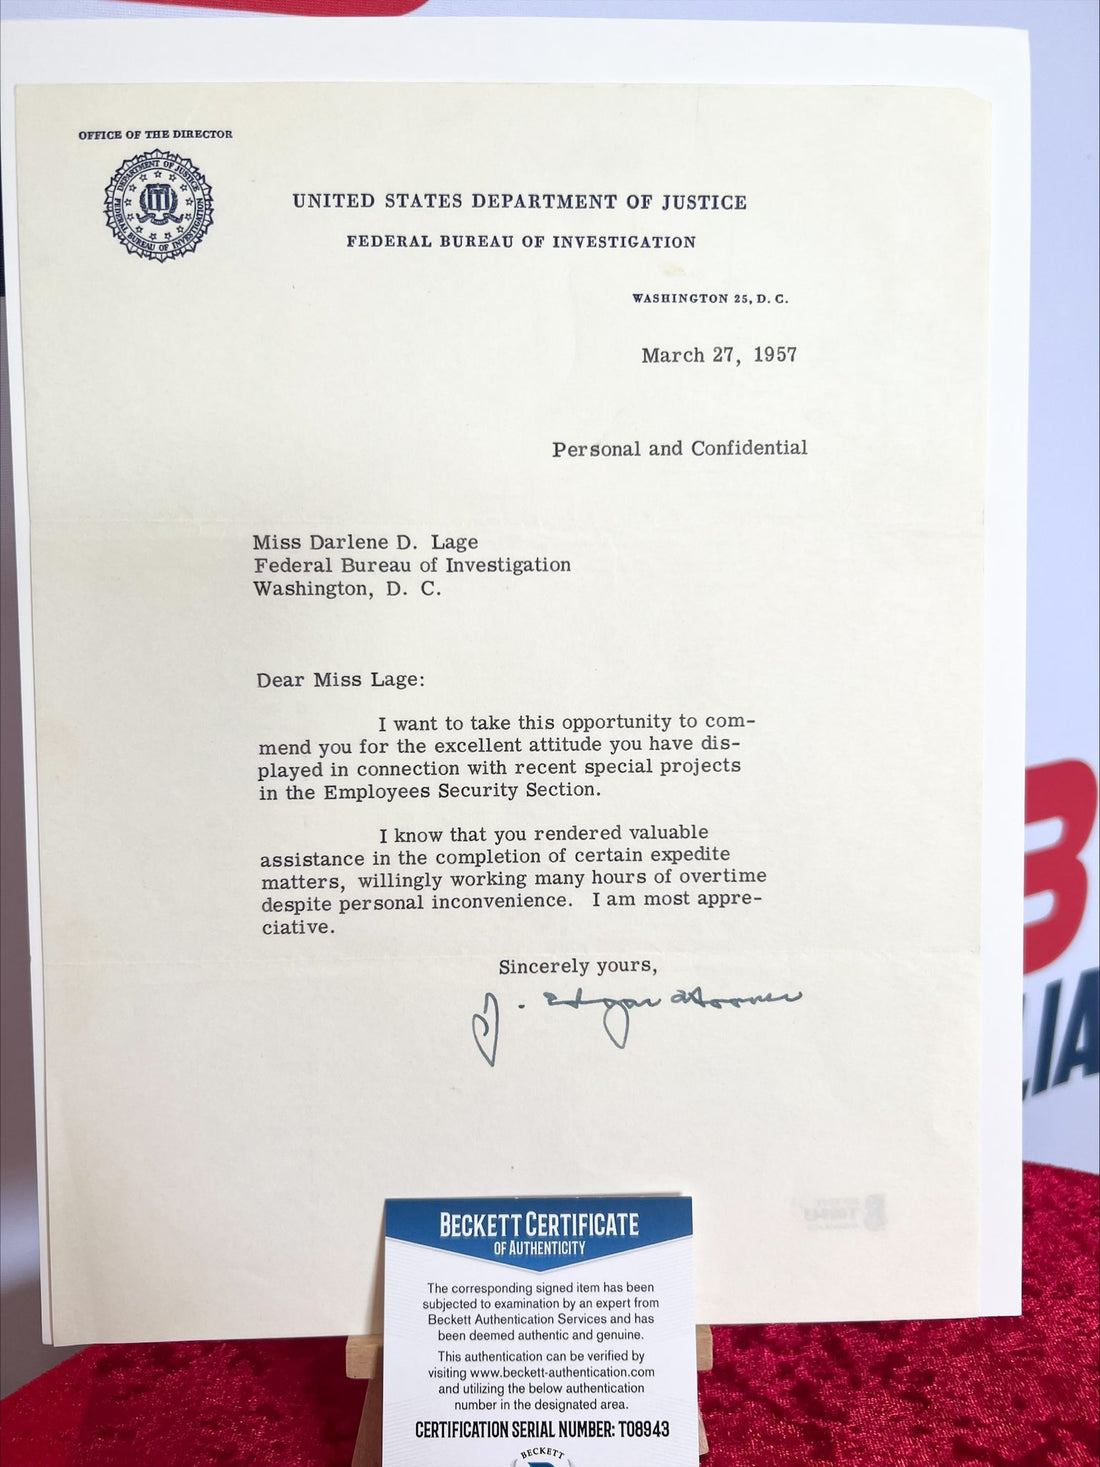 A Piece of History Travels to New York - The J. Edgar Hoover Signed Original 1957 FBI Letter